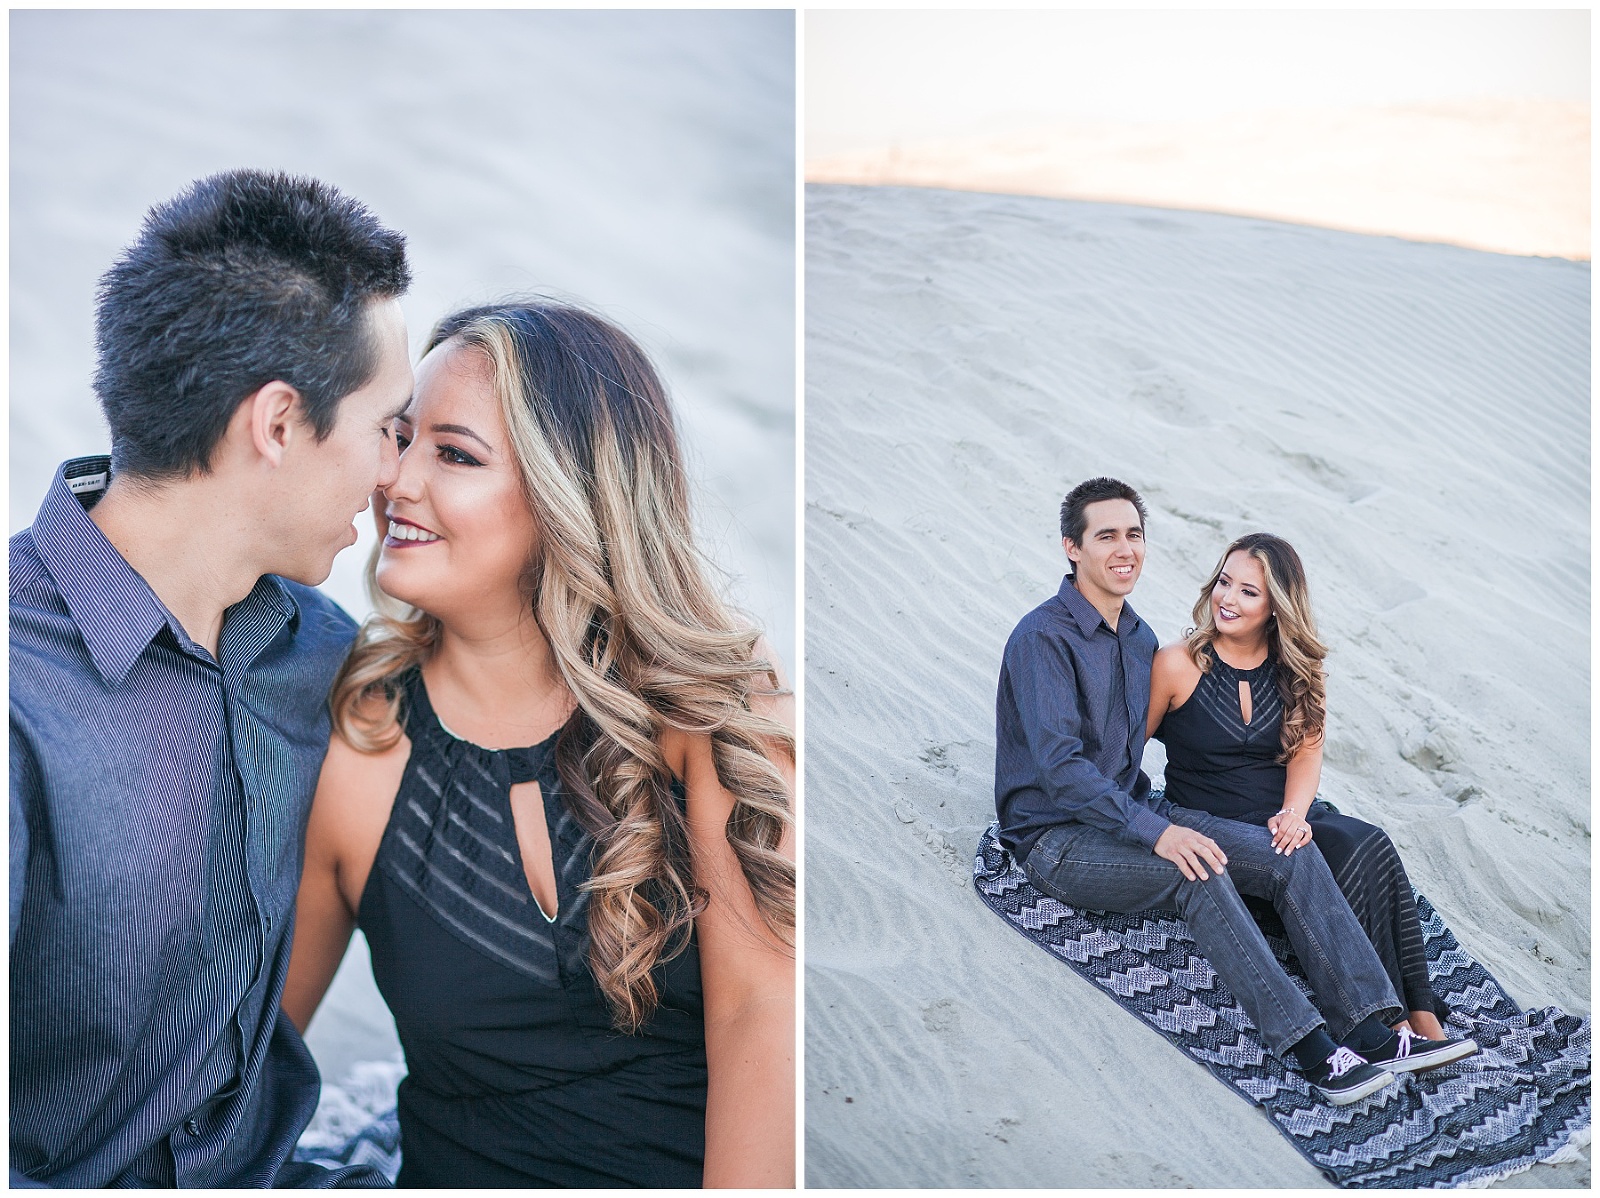 Chelsea + Kevin Engaged – Palm Springs Engagement Session » Erica